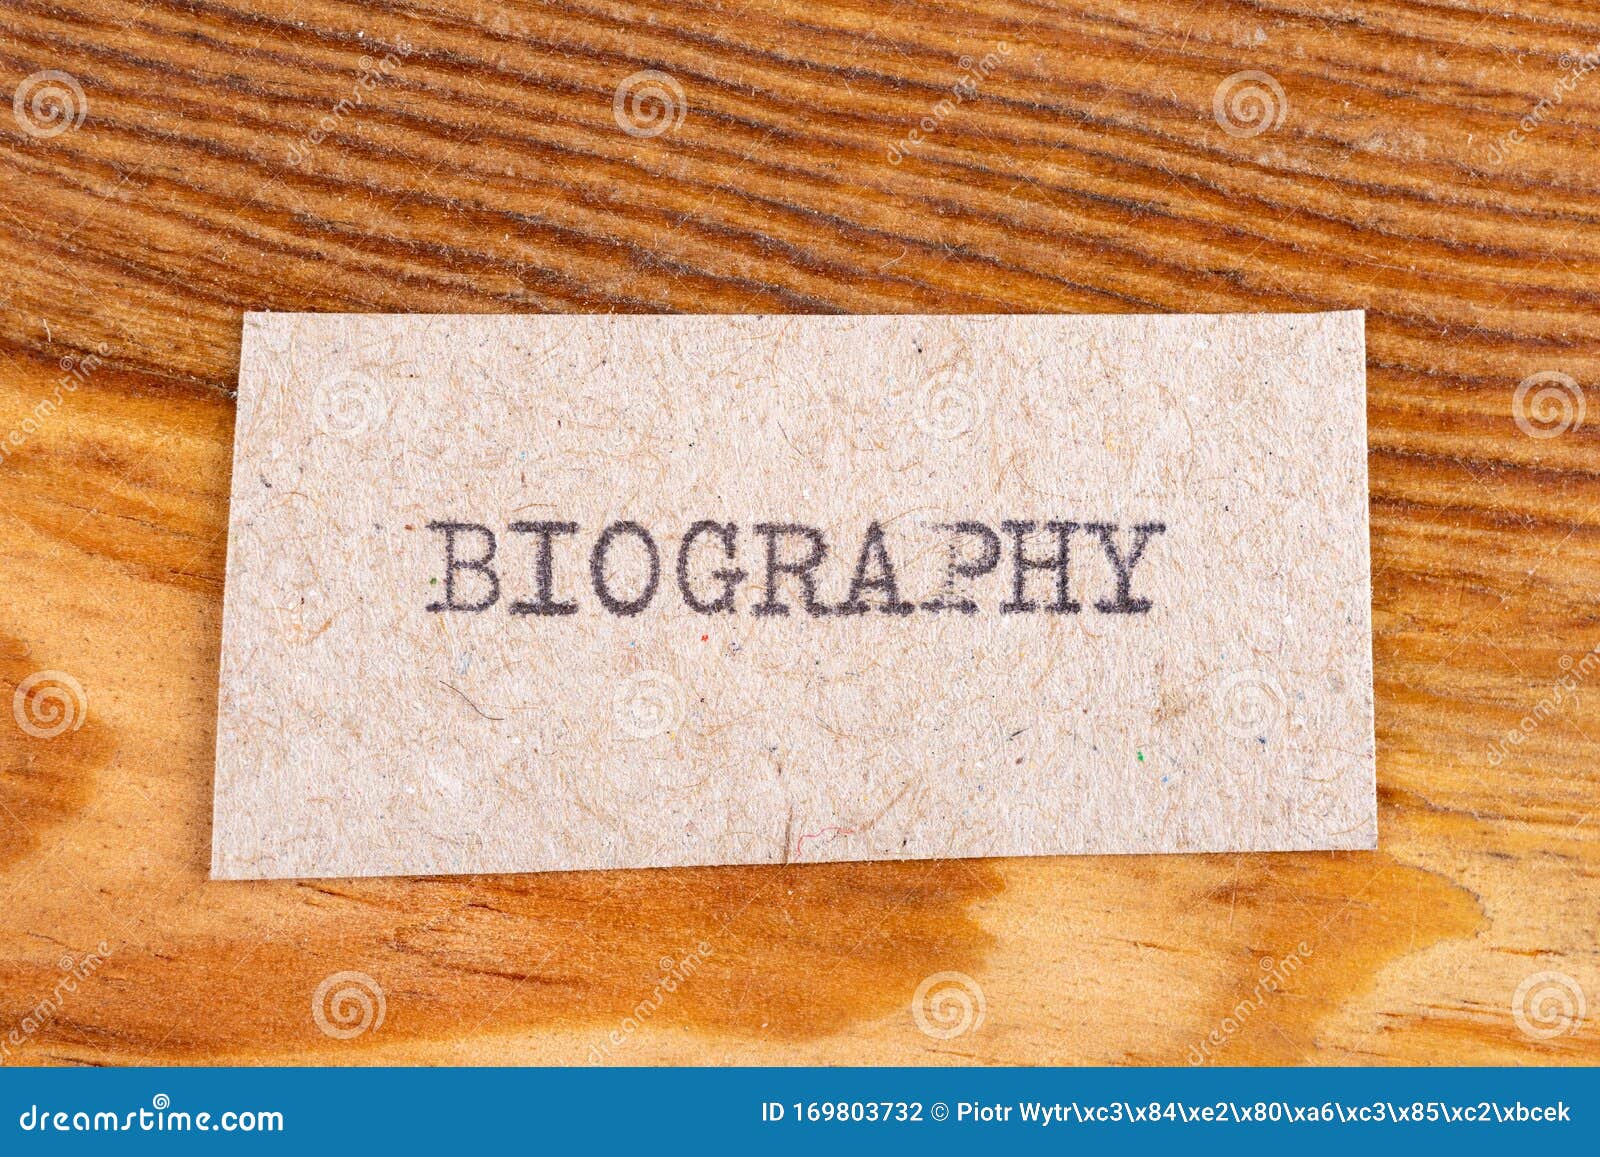 biography word means